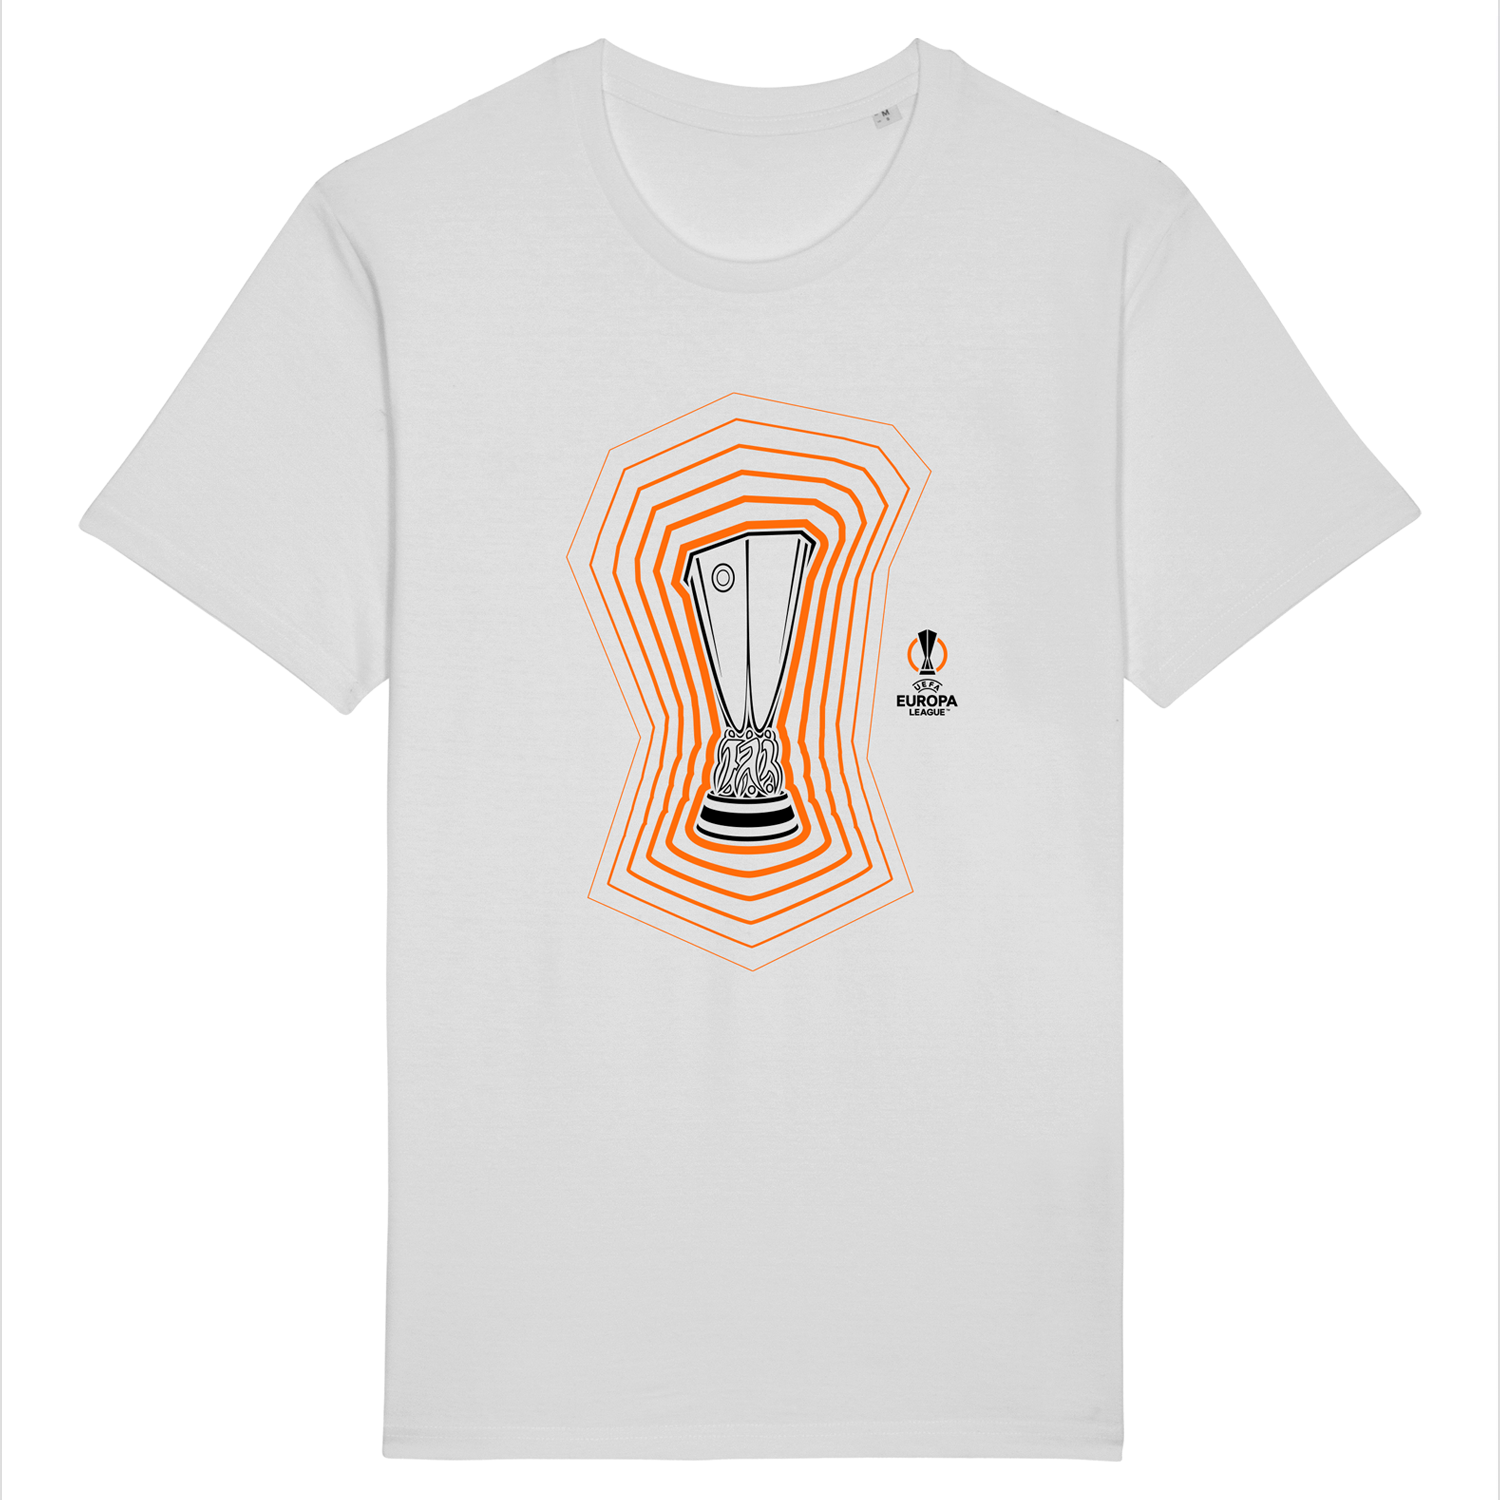 UEFA Europa League - Ultimate Trophy White T-Shirt UEFA Club Competitions Online Store